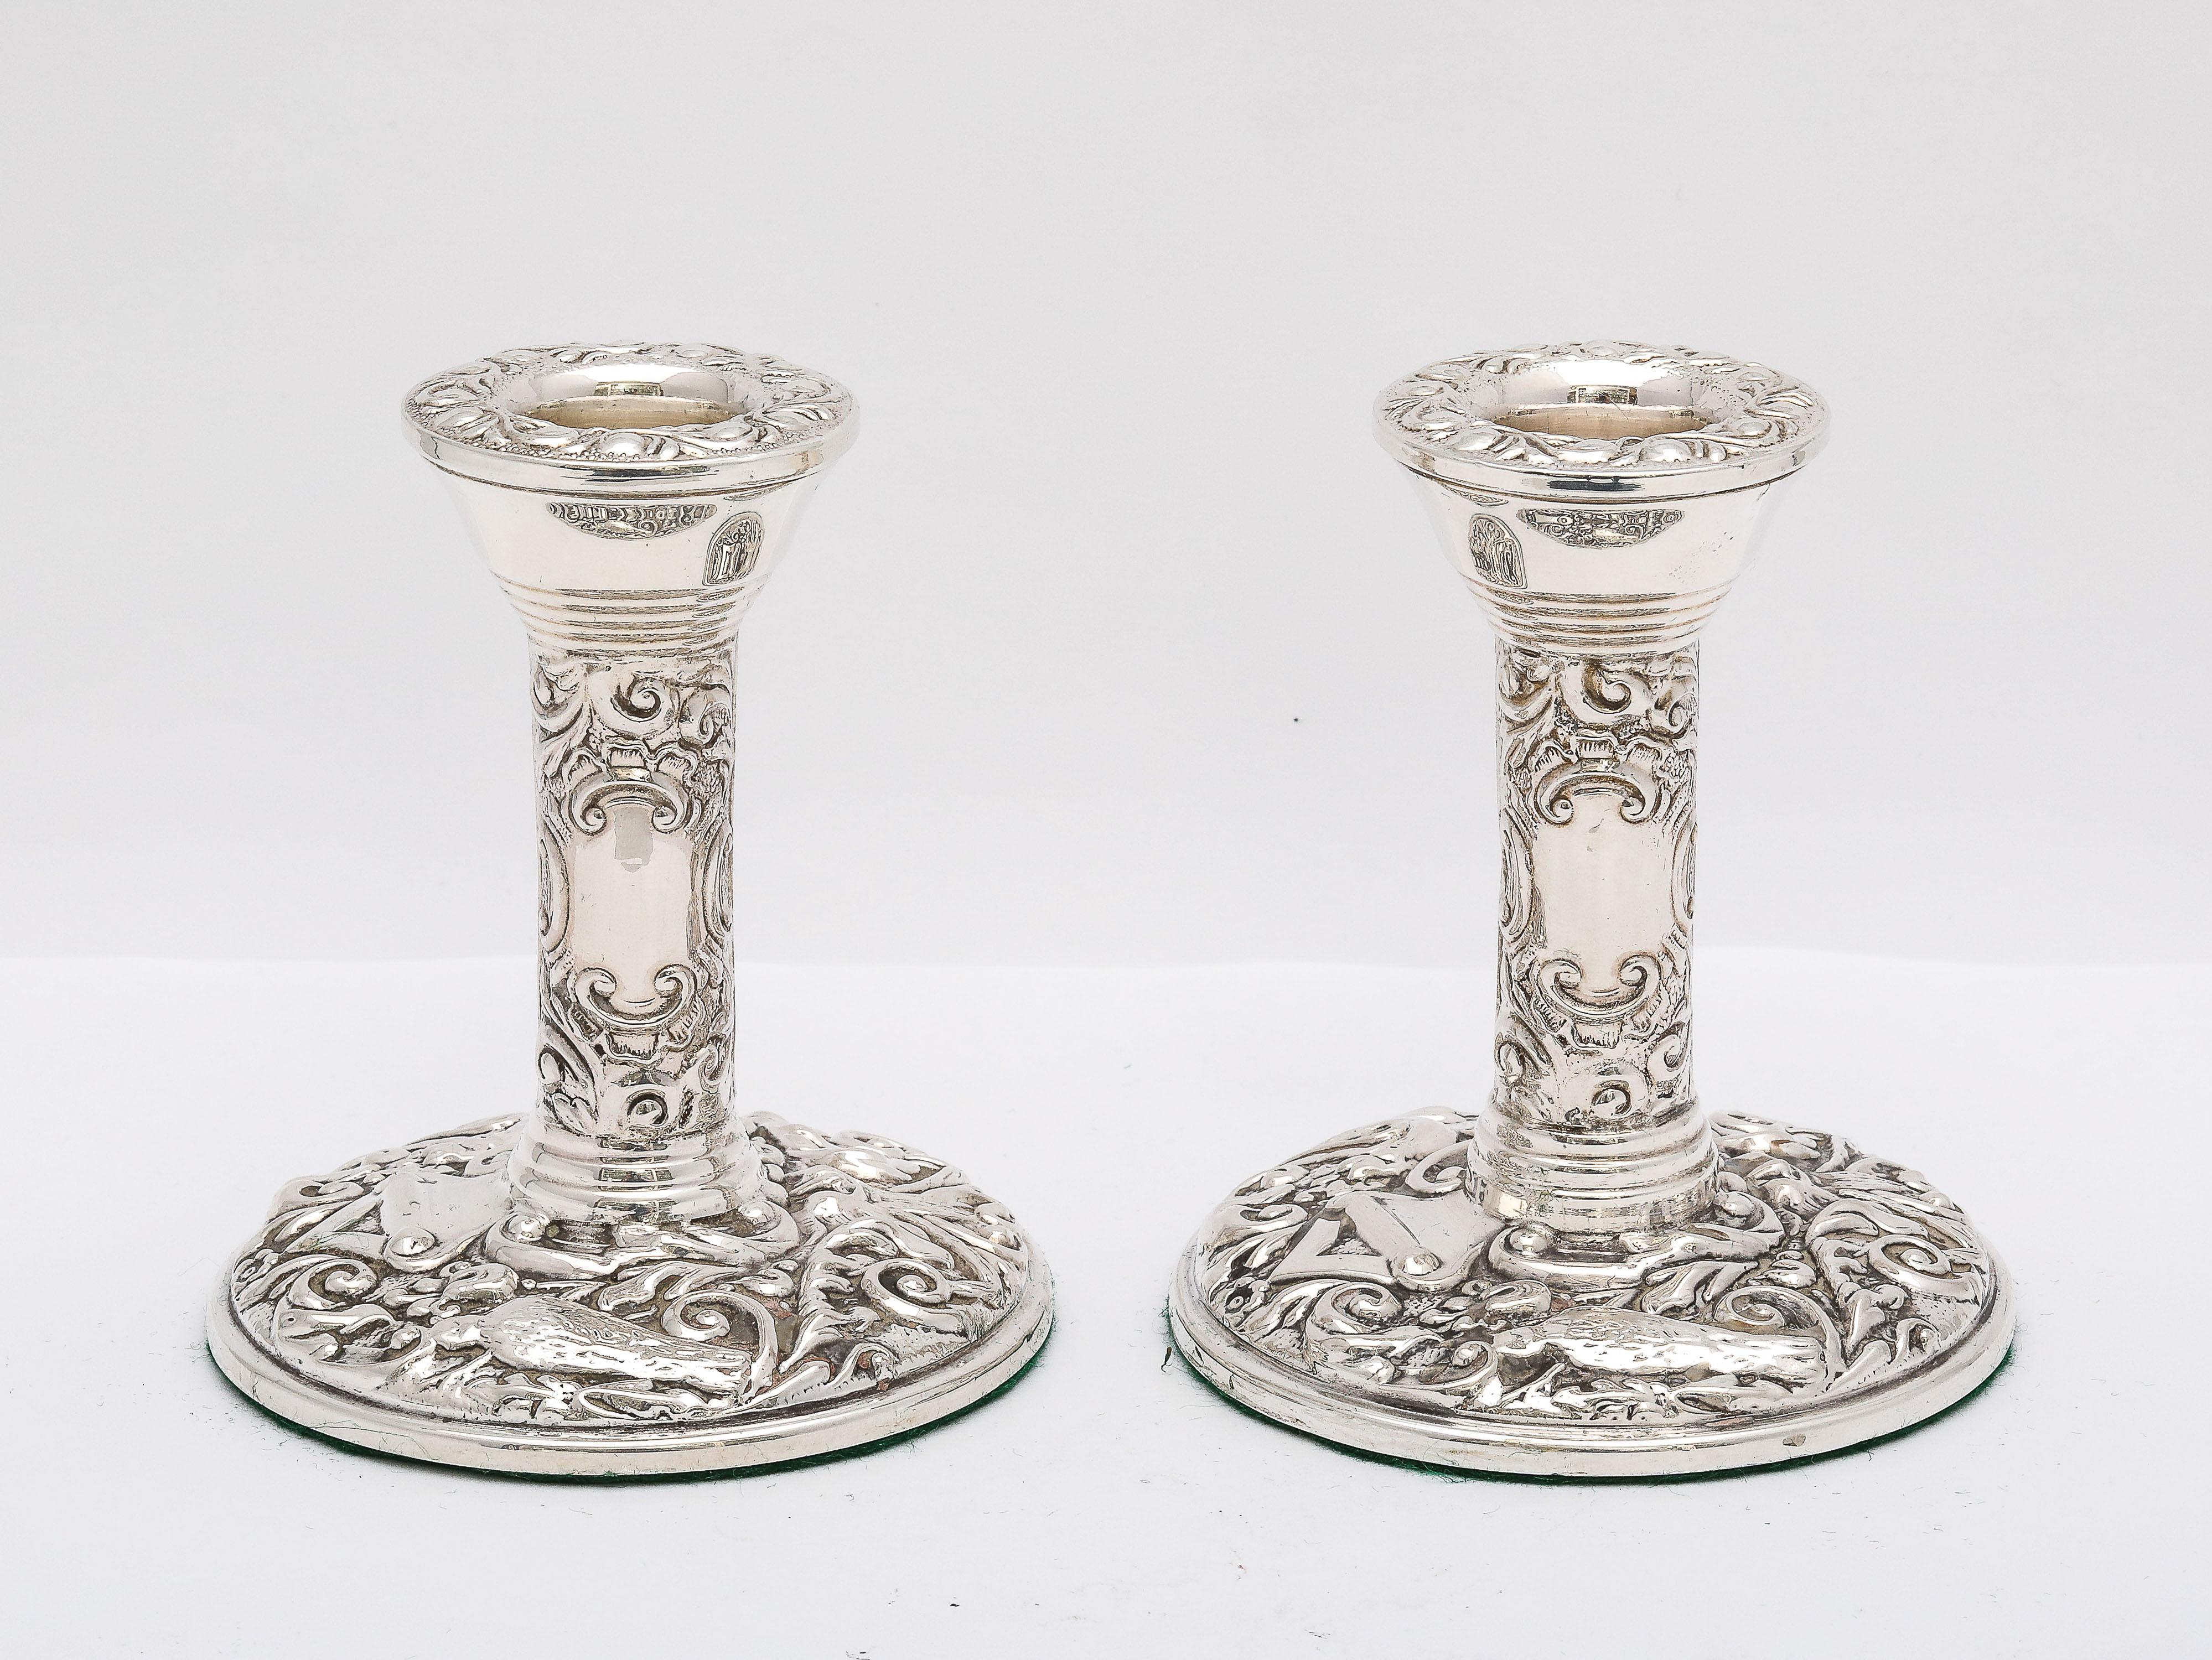 Pair of Victorian-Style, sterling silver candlesticks, Birmingham, England, year-hallmarked for 1972, Broadway and Co. - makers. Each candlestick measures 4 inches high x 3 1/4 inches diameter (across base). Pair is weighted. Each candlestick is